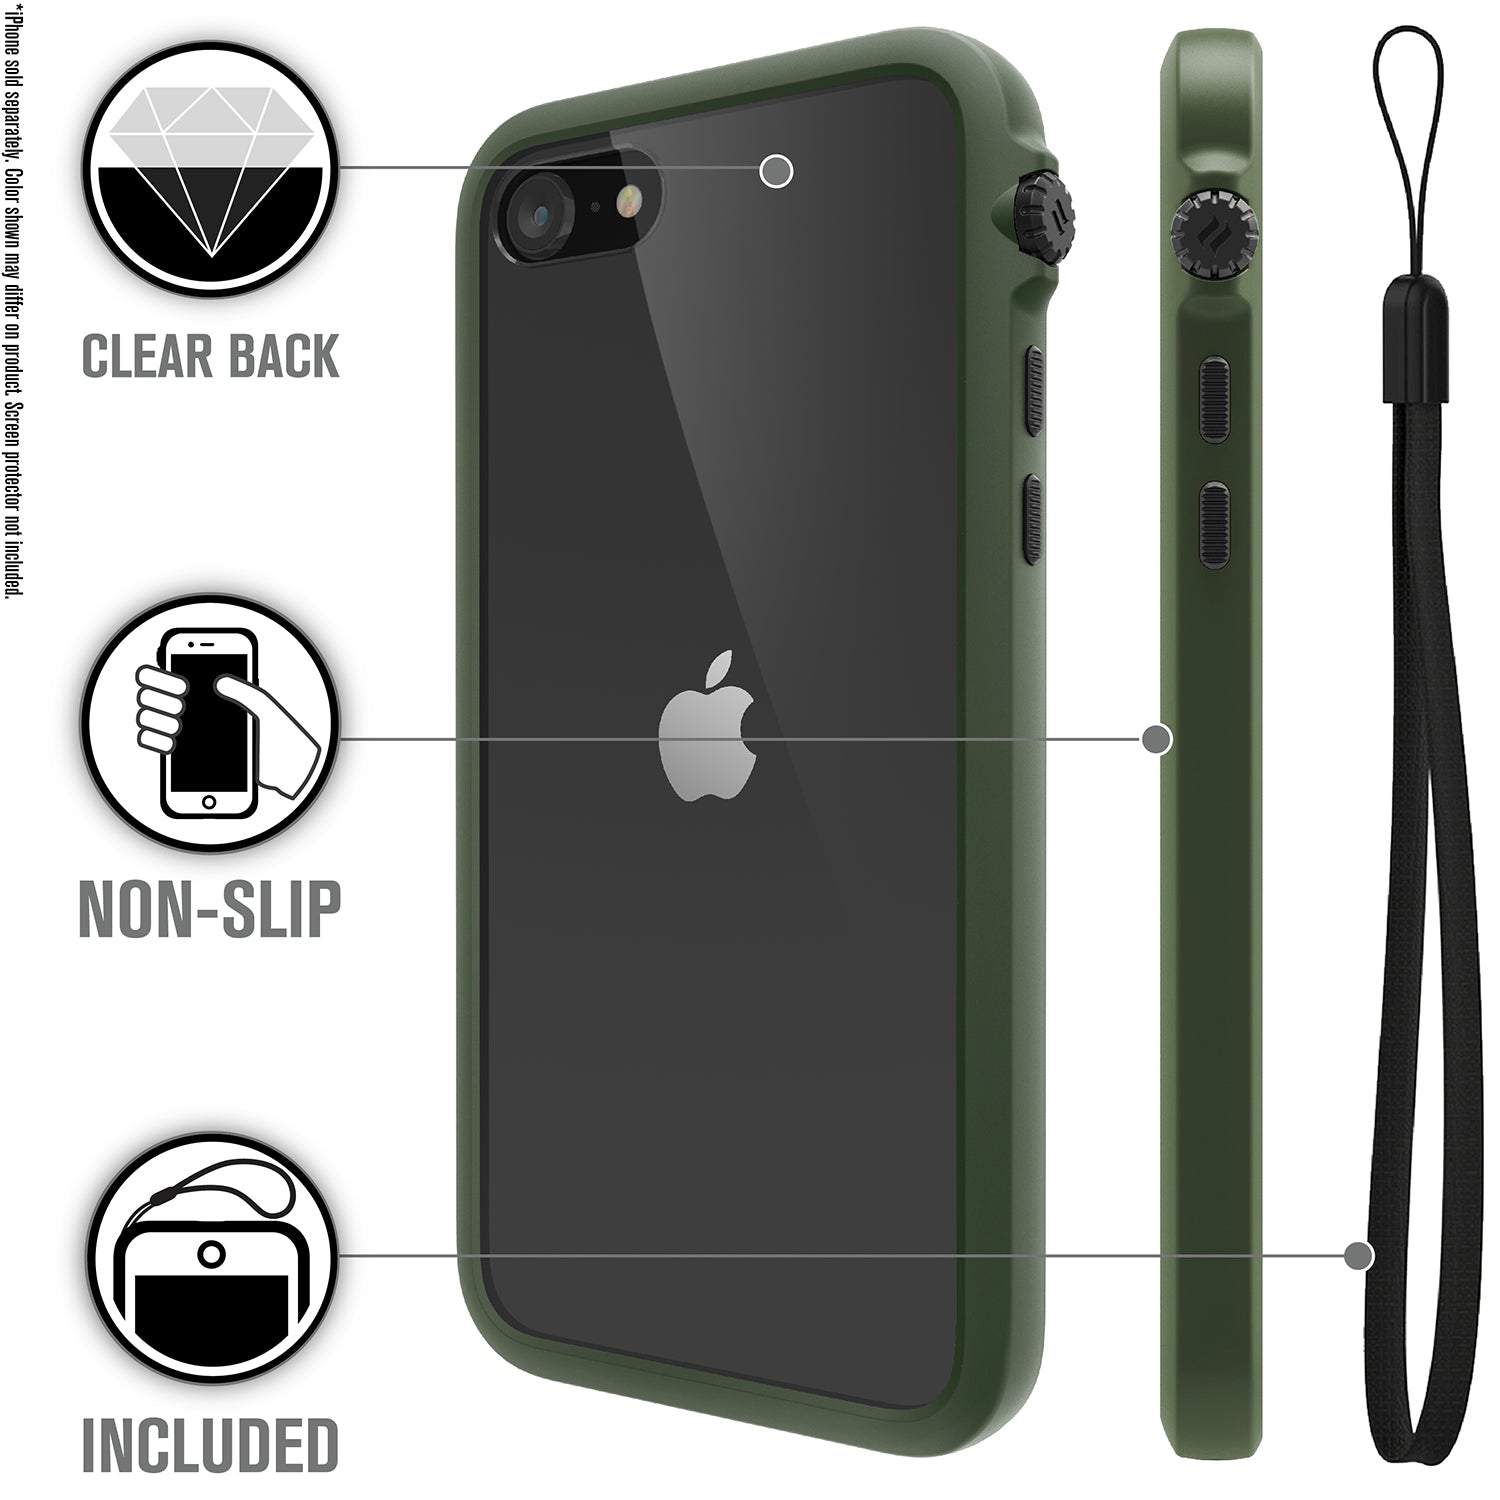 Catalyst iphone 8/7 impact protection case showing the case features with lanyard in a army green colorway text reads clear back non-slip included 